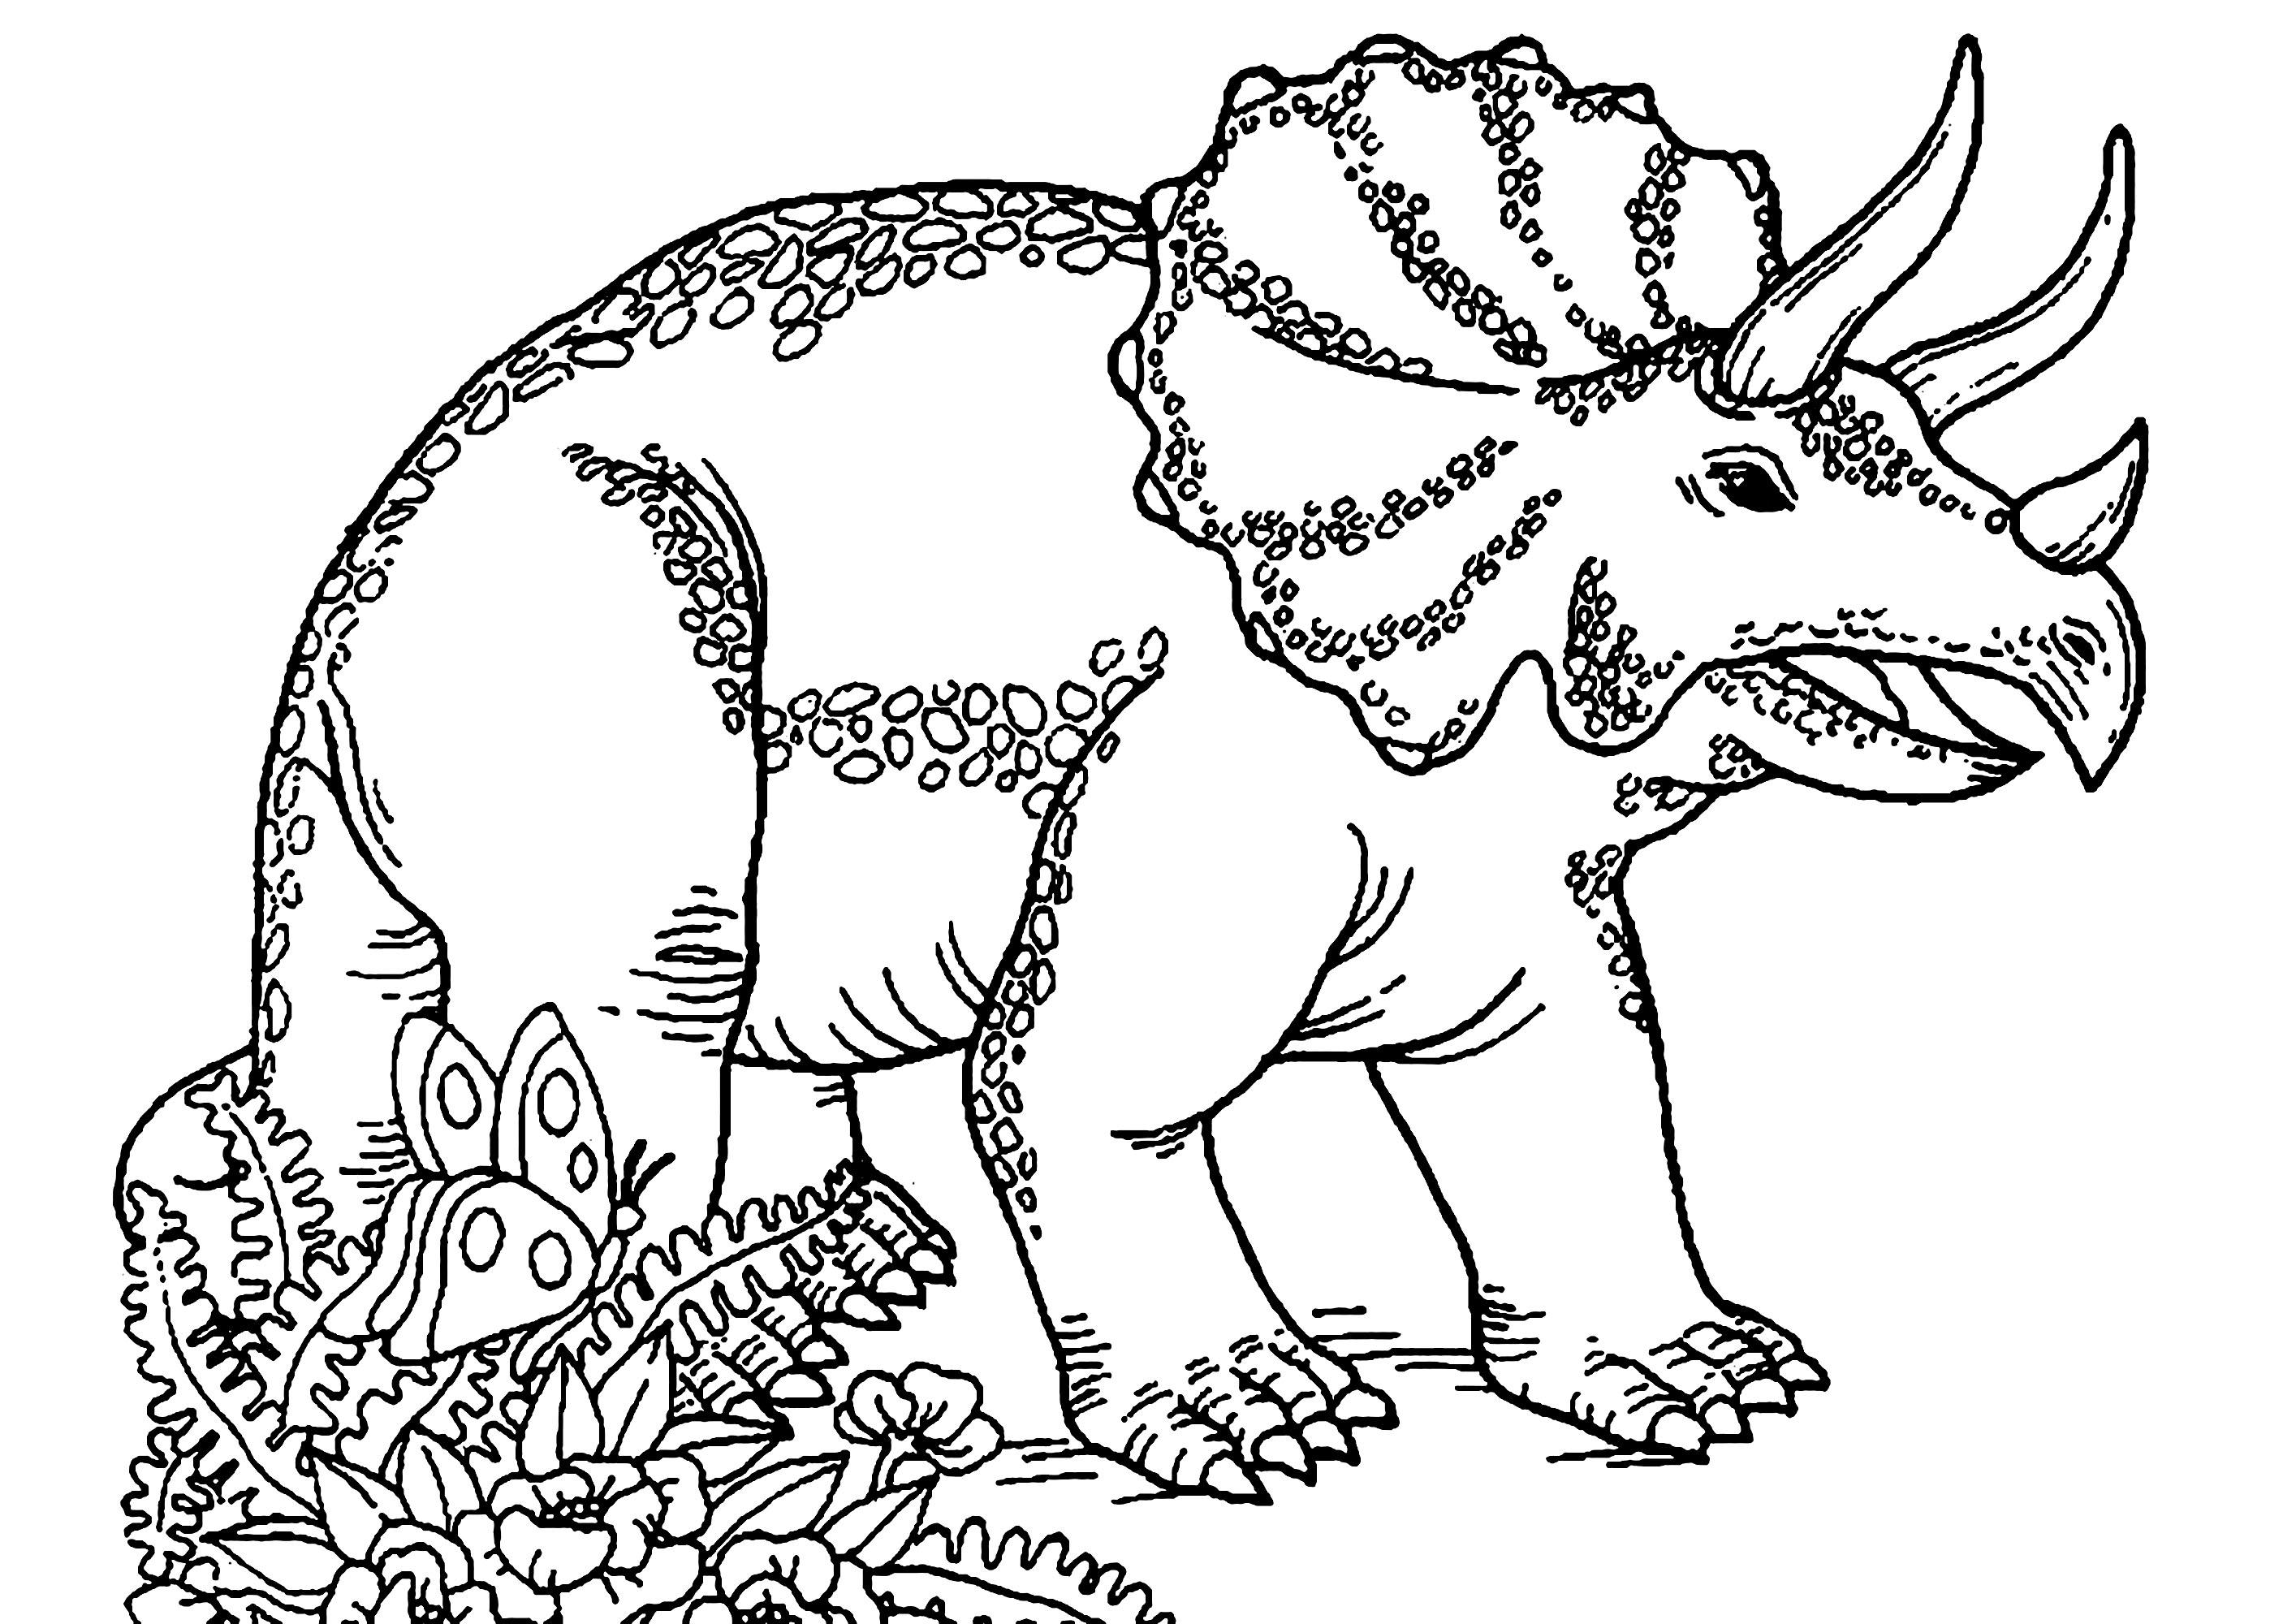 Coloring Pages Dinosaurs Dinosaurs To Download Ba Media We